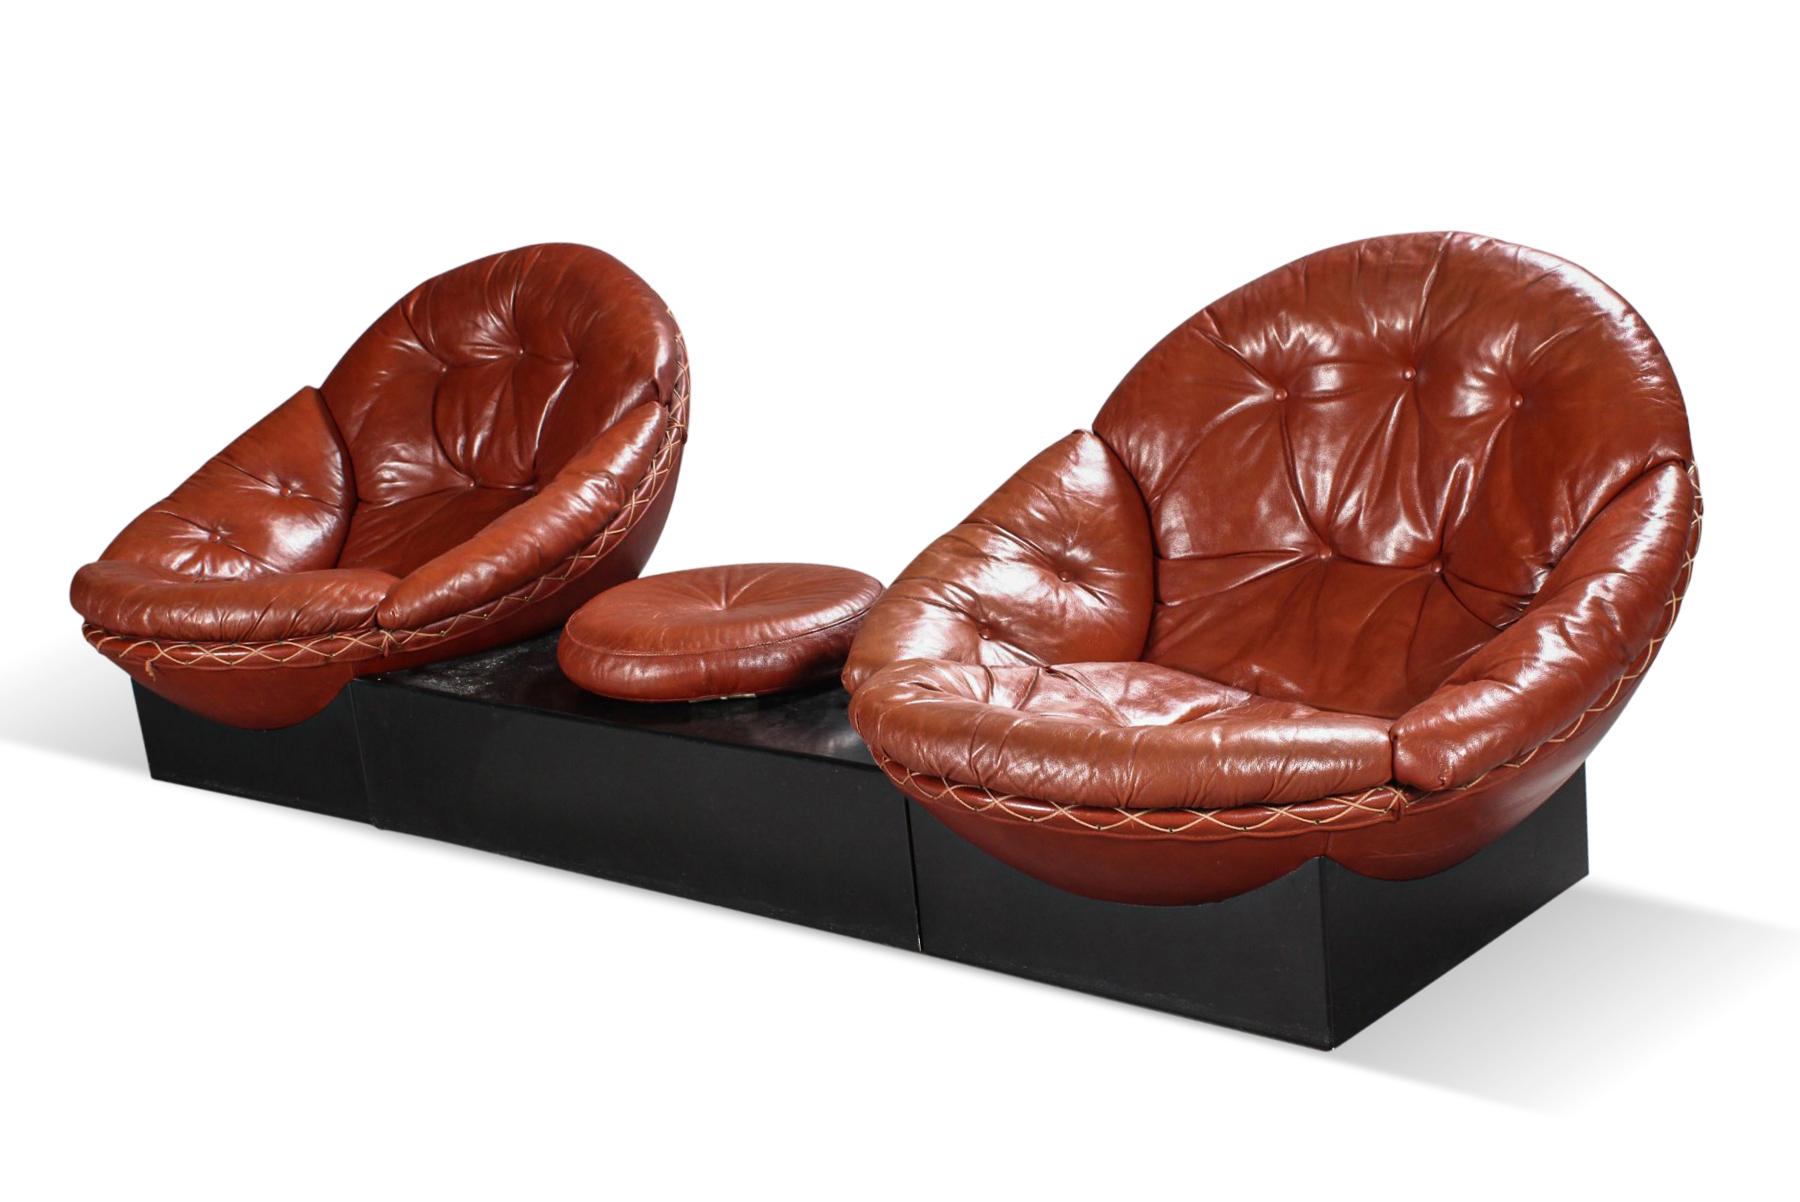 Rare Modular Leather Sofa Set by Illum Wikkelsø In Good Condition For Sale In Berkeley, CA